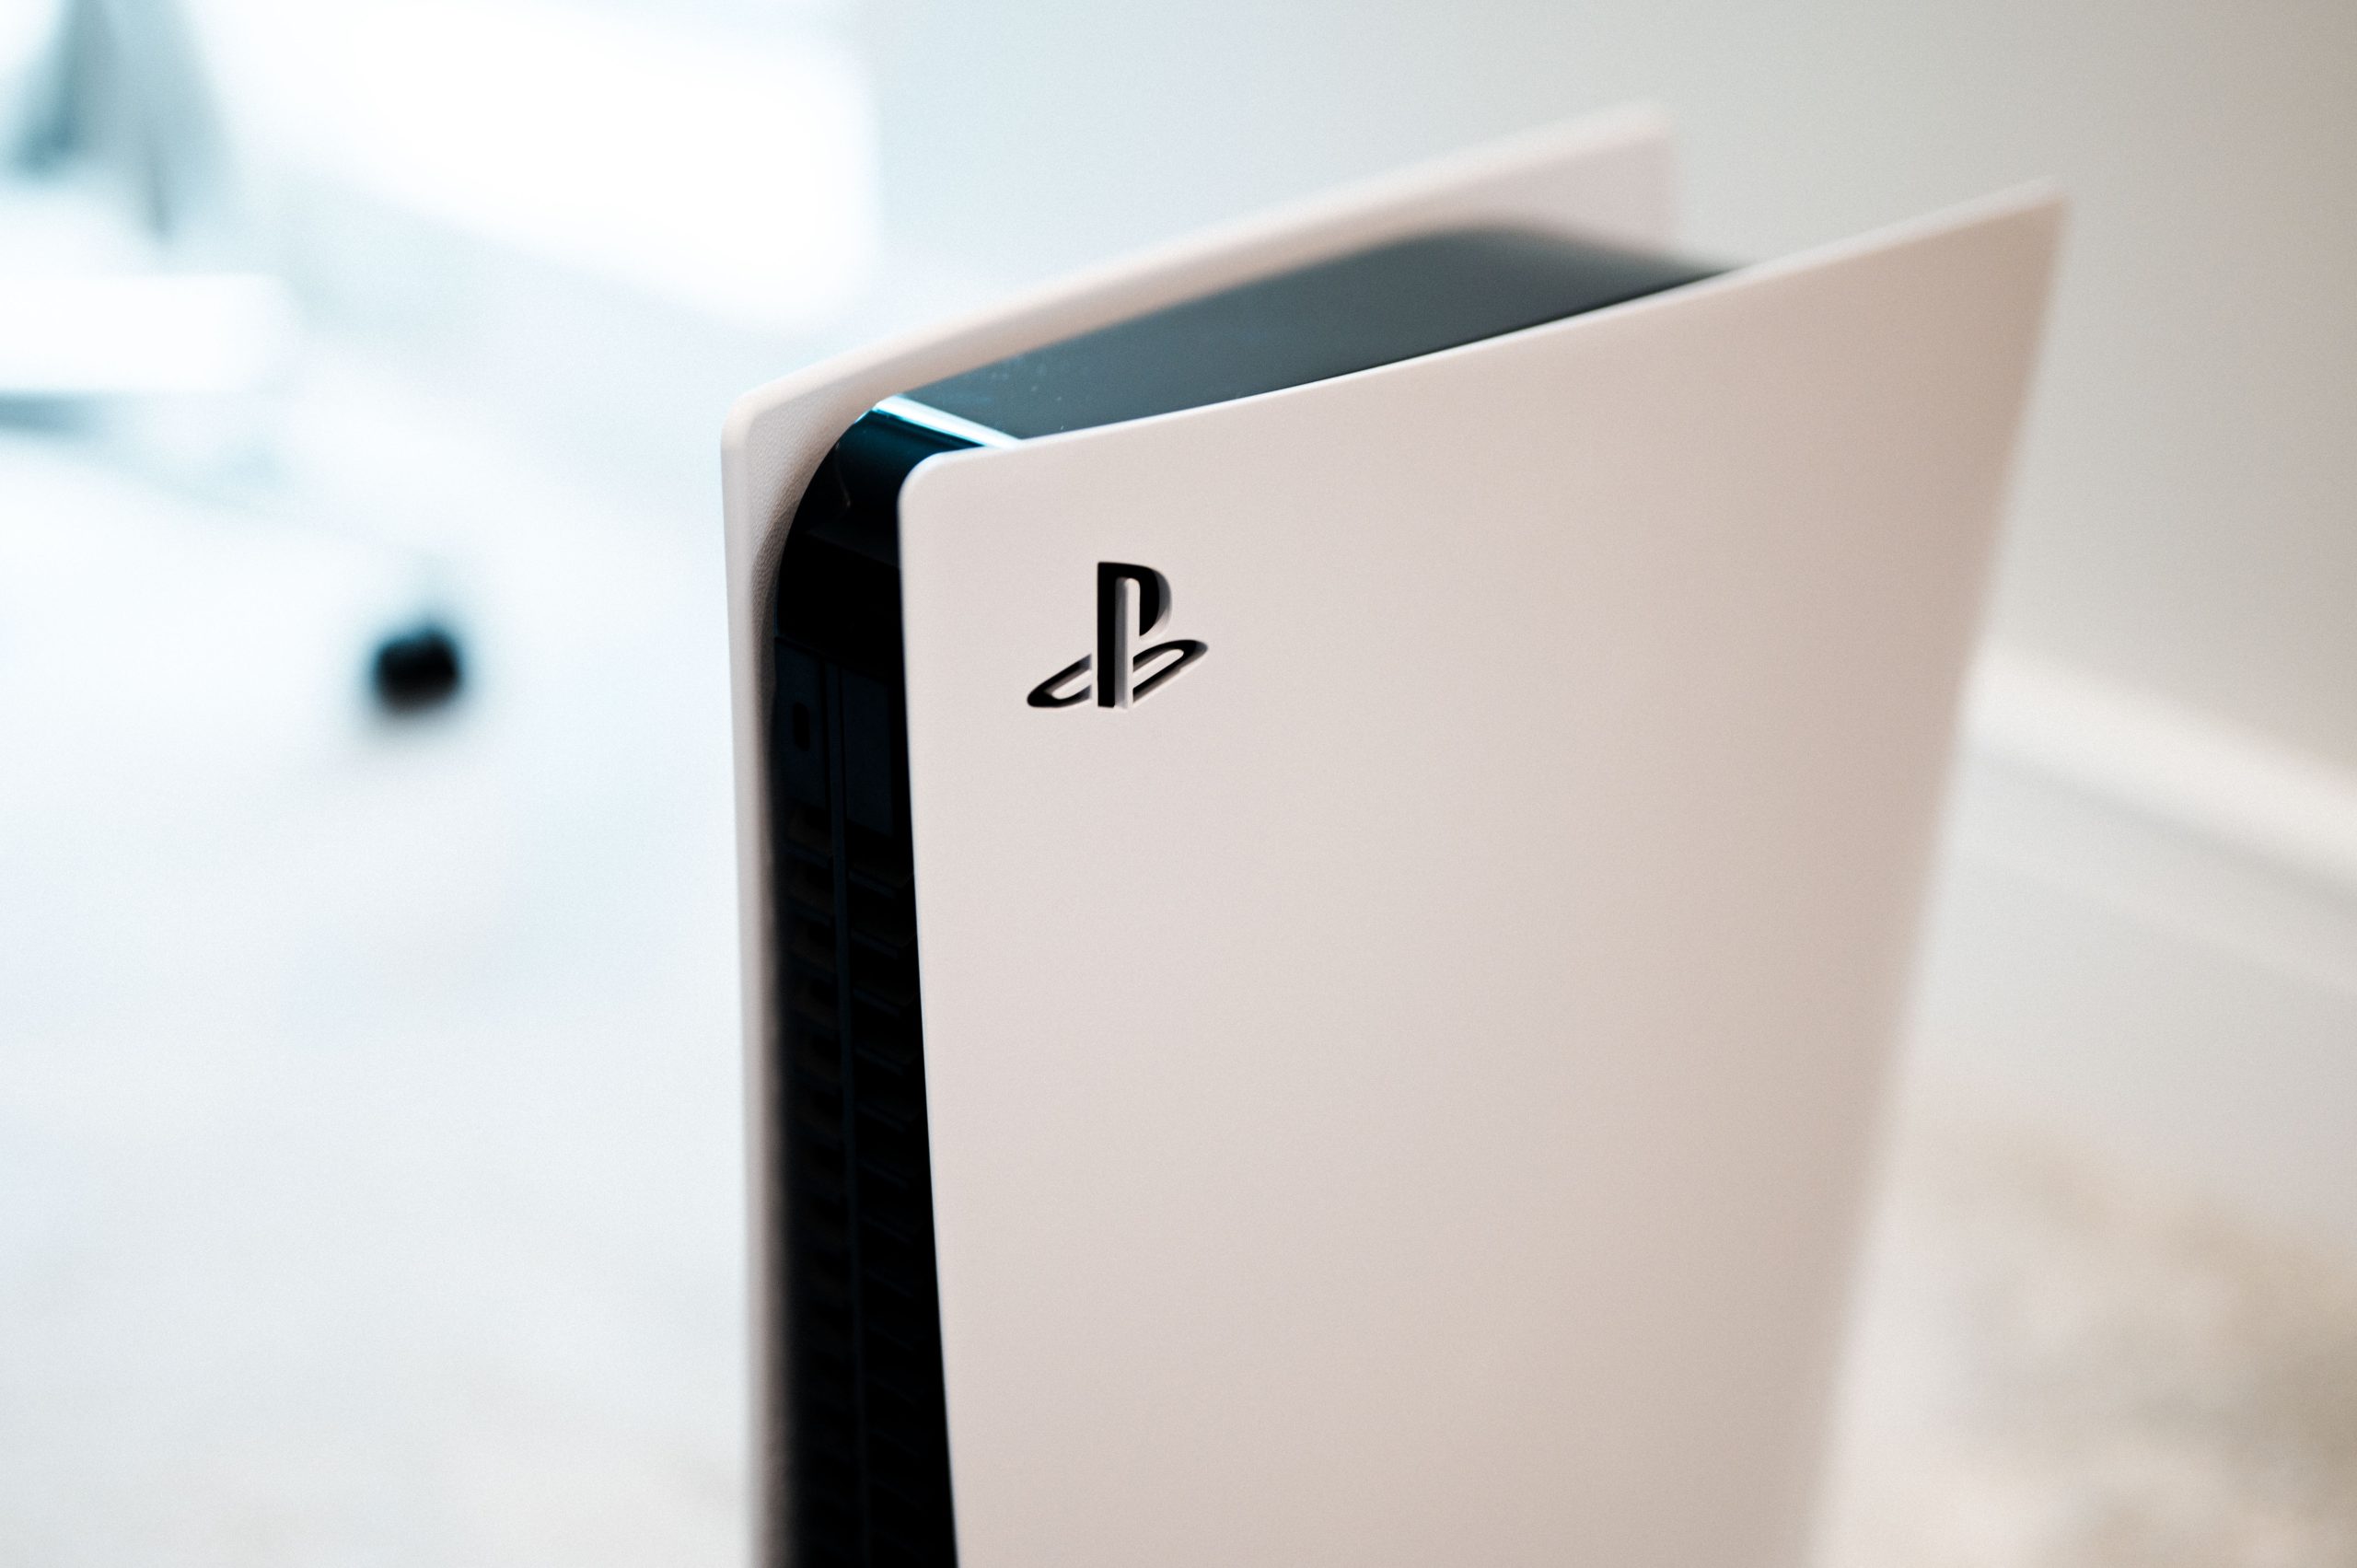 sony-boosts-playstation-gaming-growth-forecast-despite-31%-profit-drop-in-first-quarter